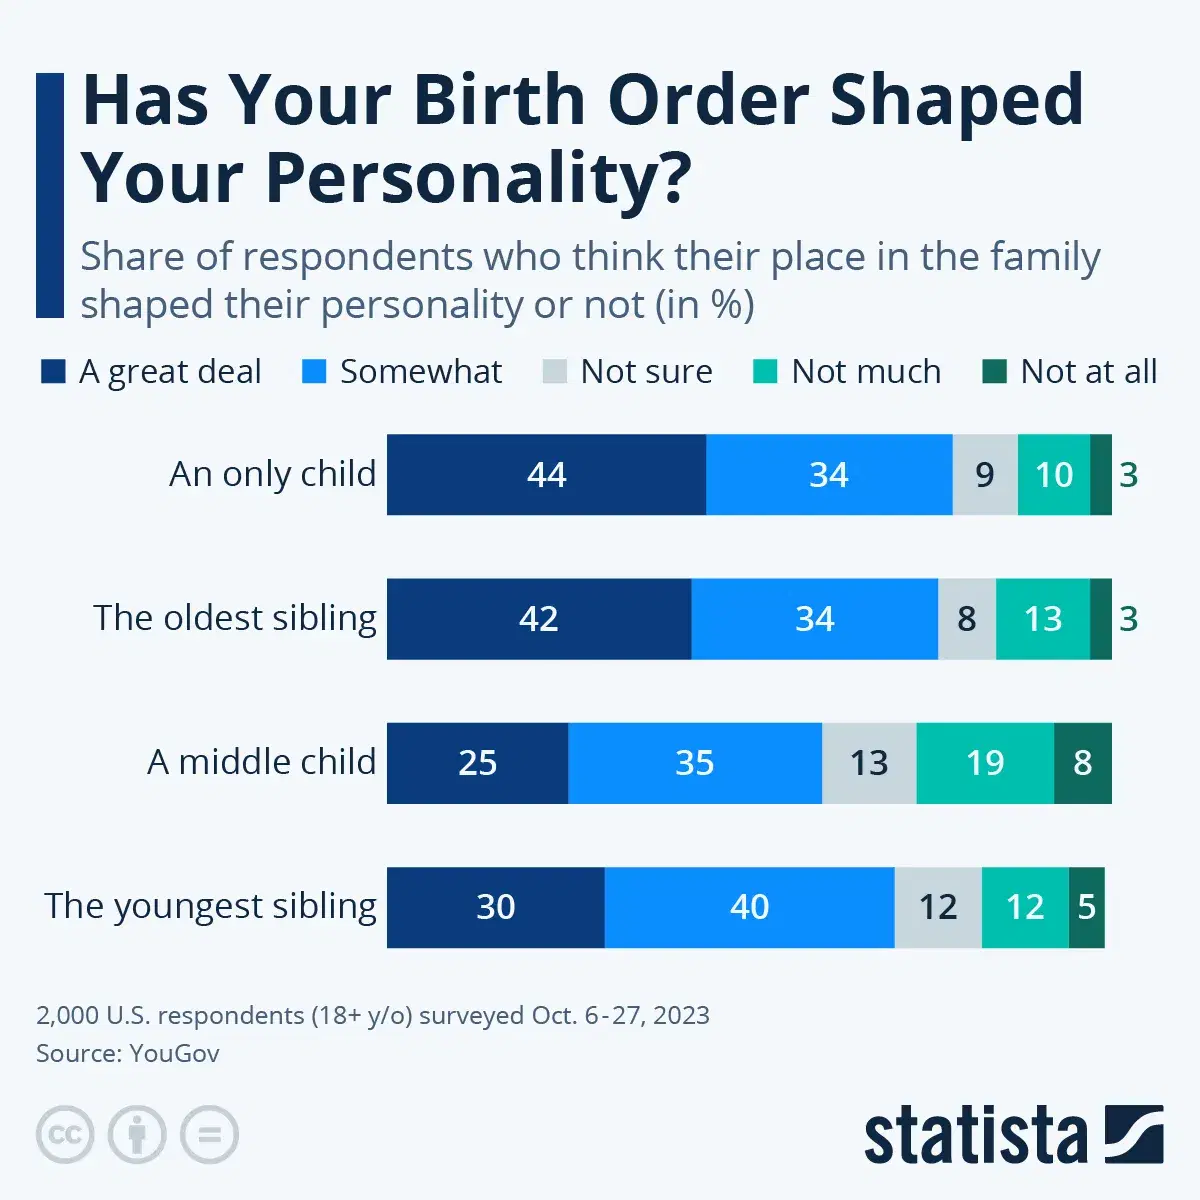 Has Your Birth Order Shaped Your Personality?